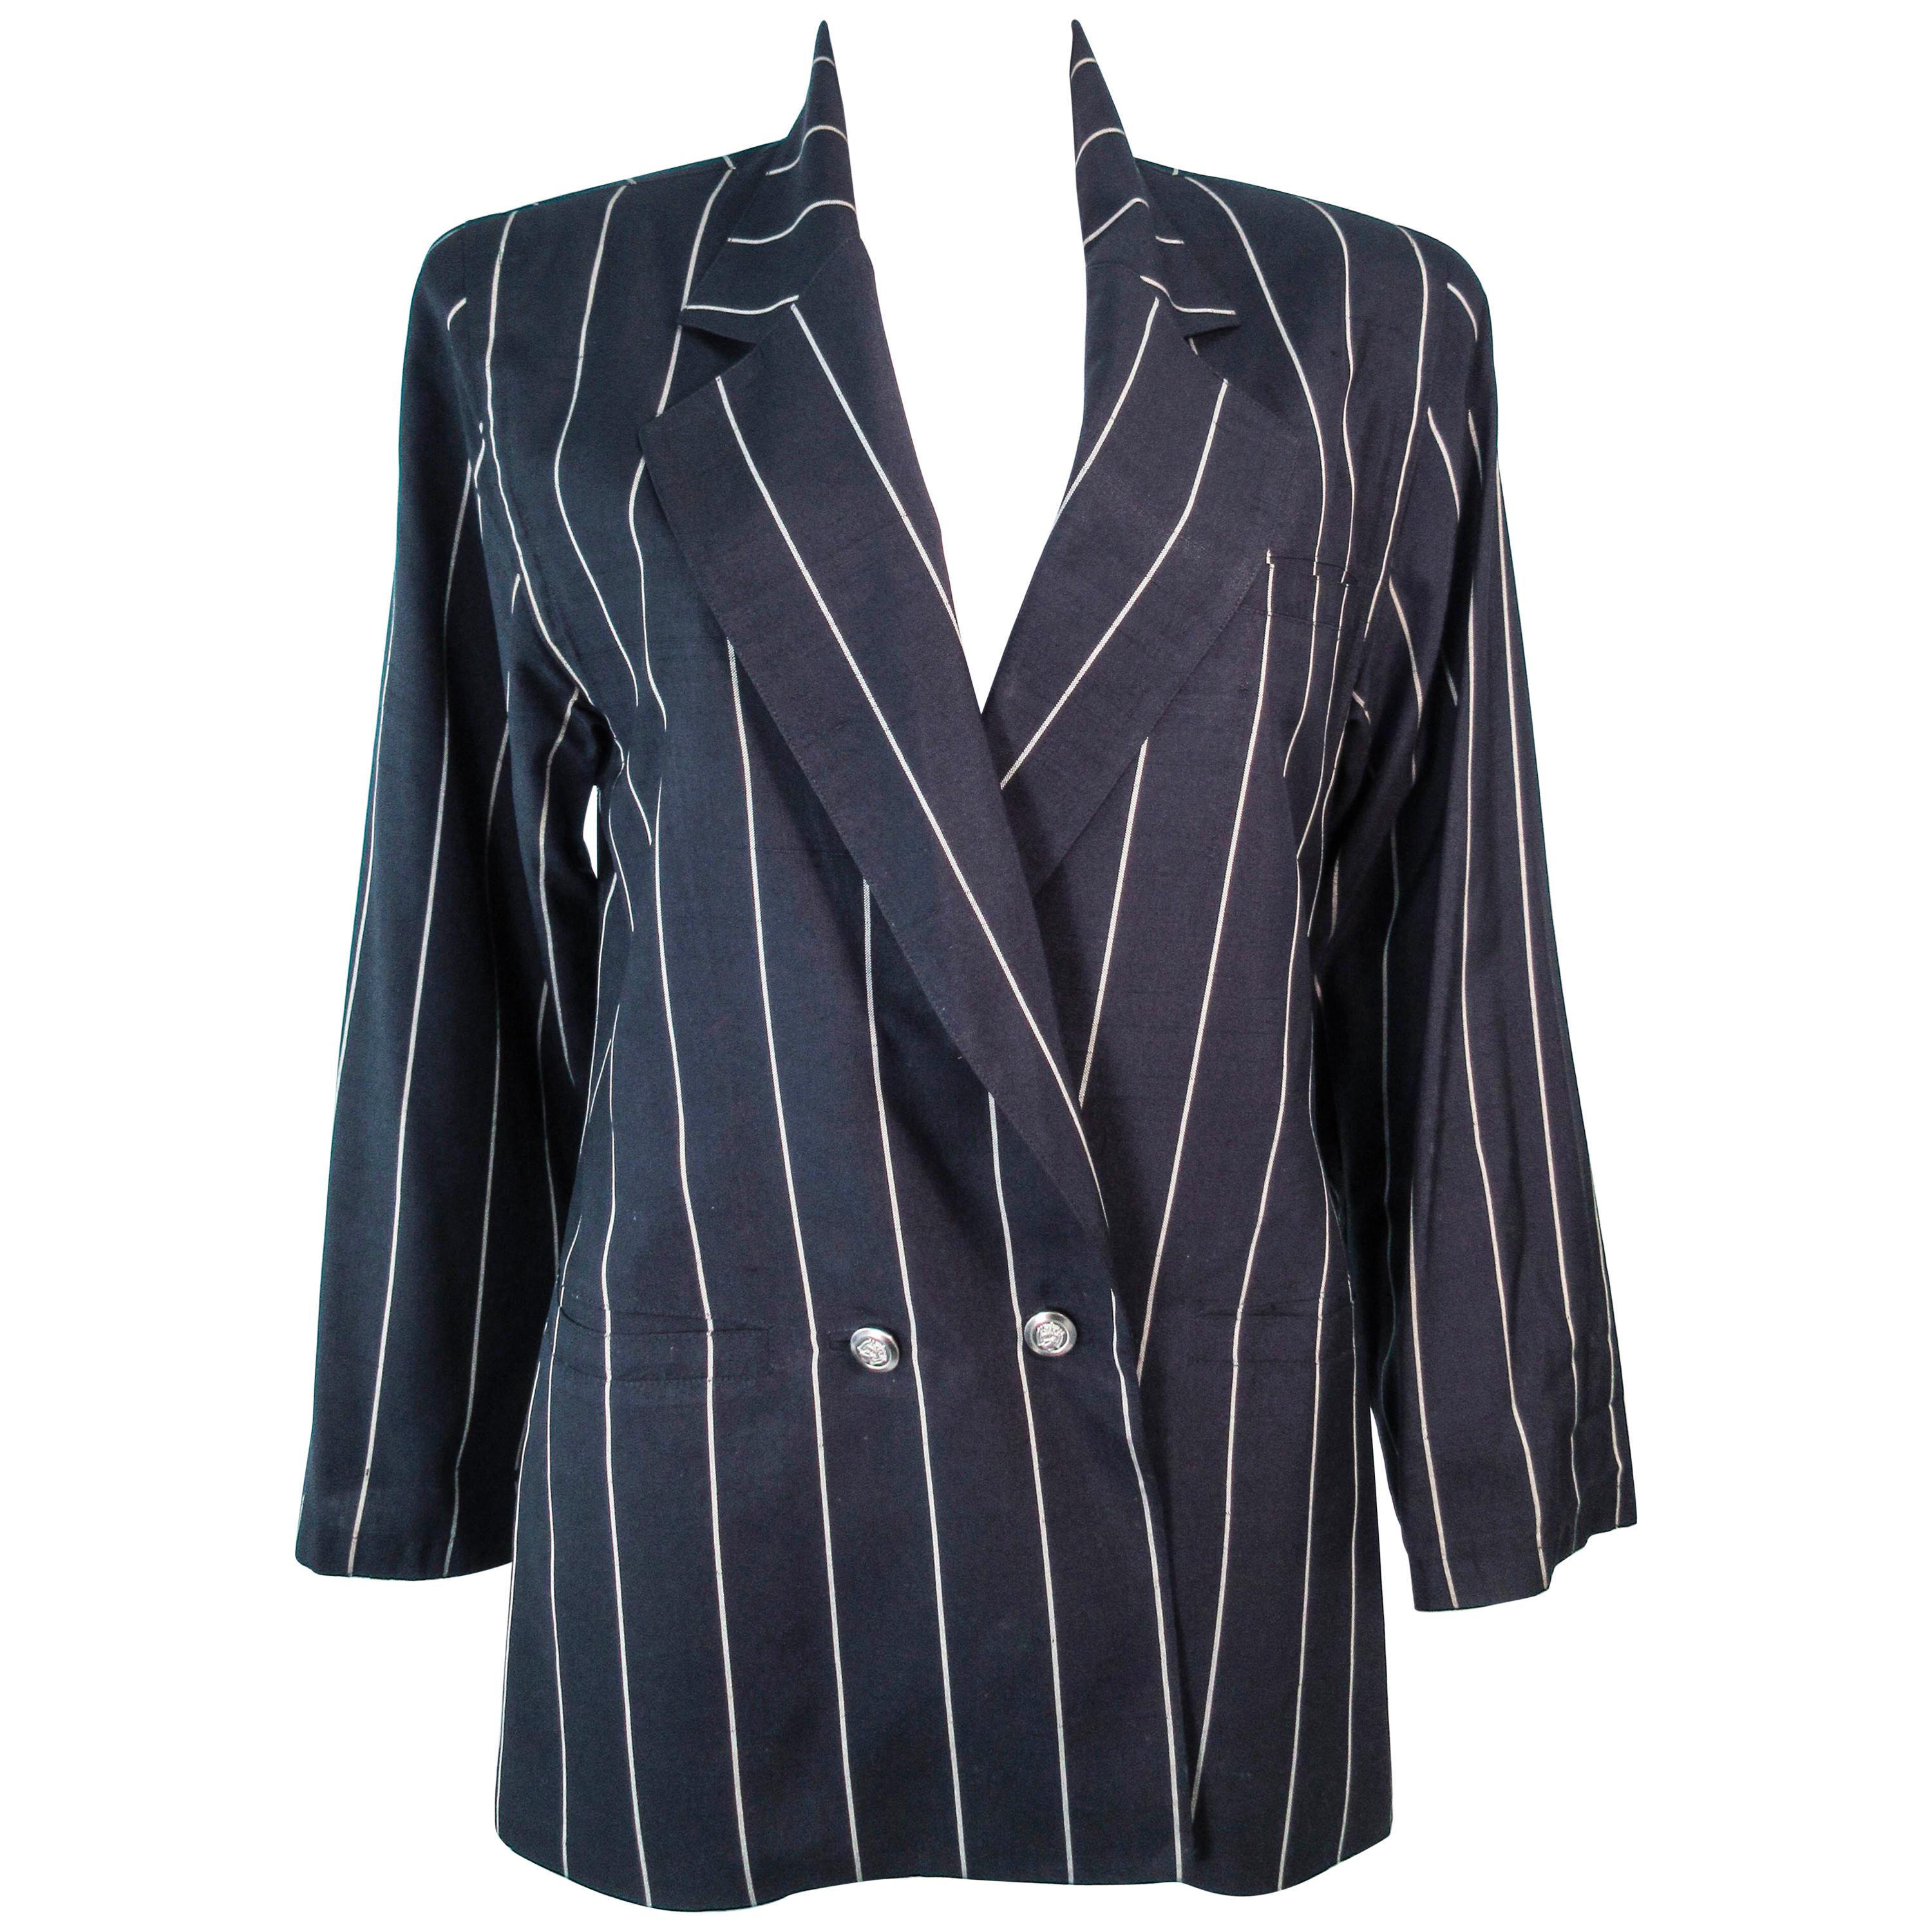 GIANNI VERSACE Black & Cream Striped Jacket Size 6 For Sale